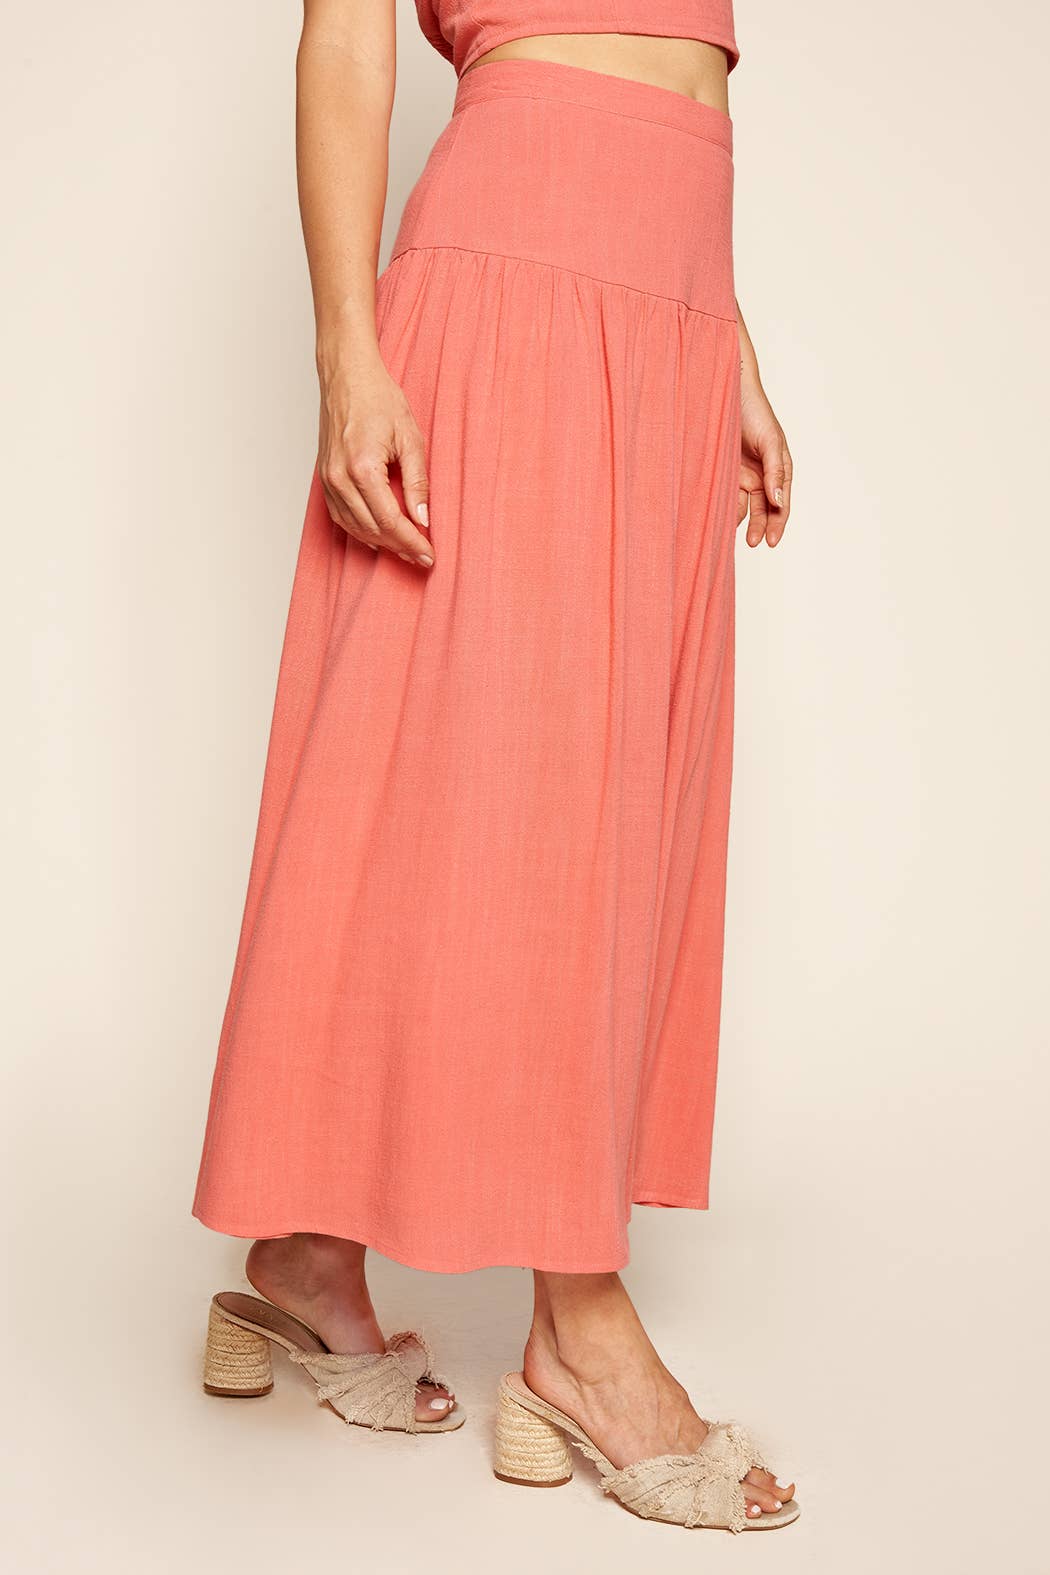 Sugarlips - Izzy Maxi A Line Skirt